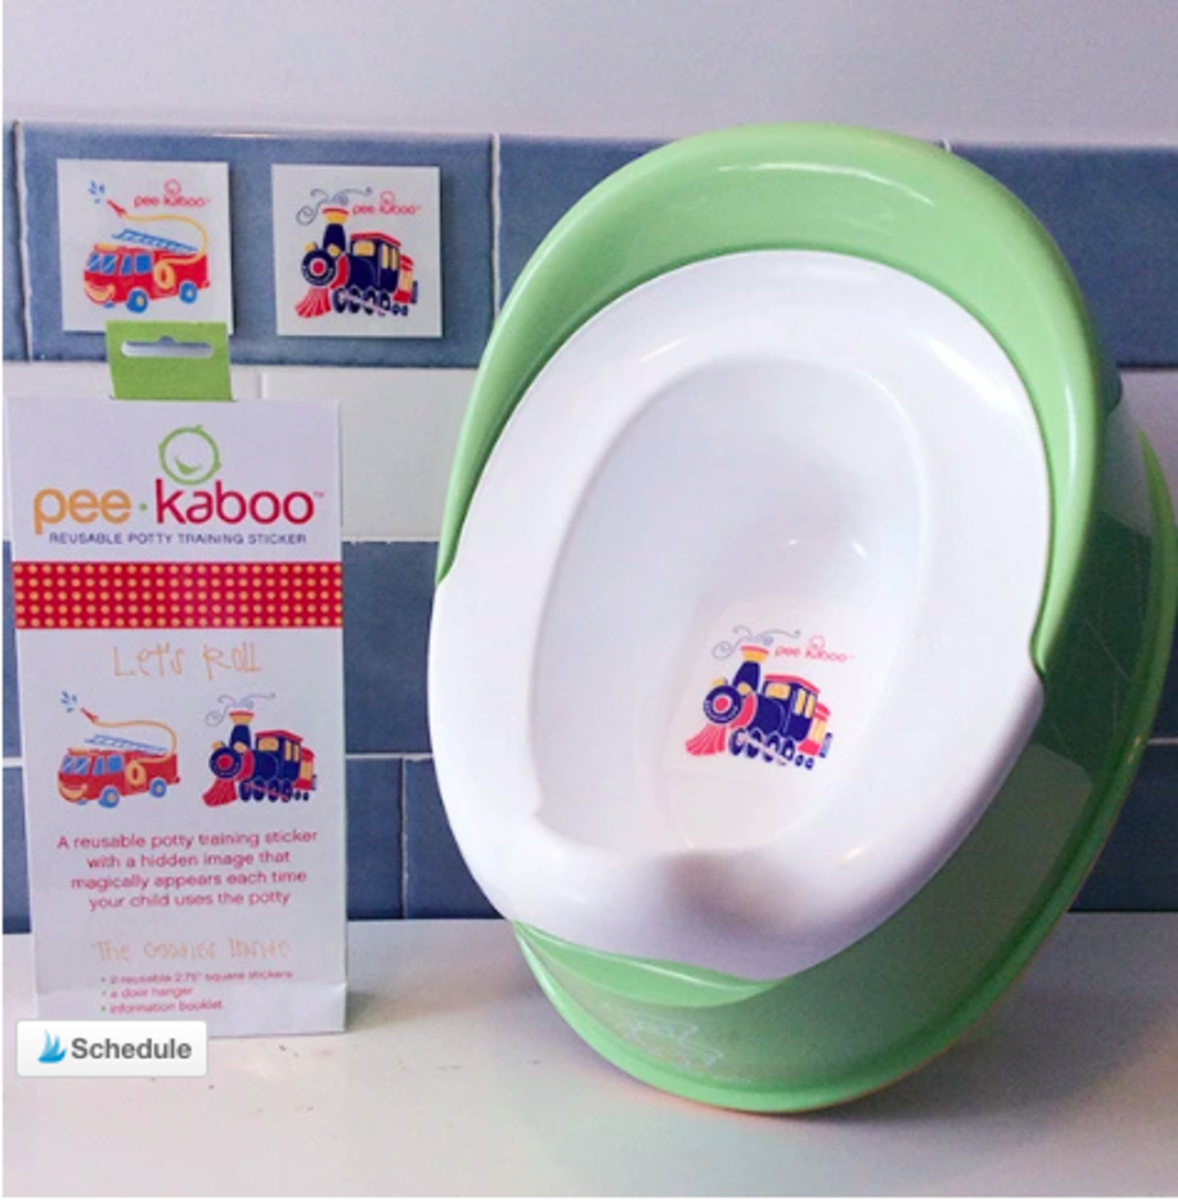 Potty Training Tips for Success